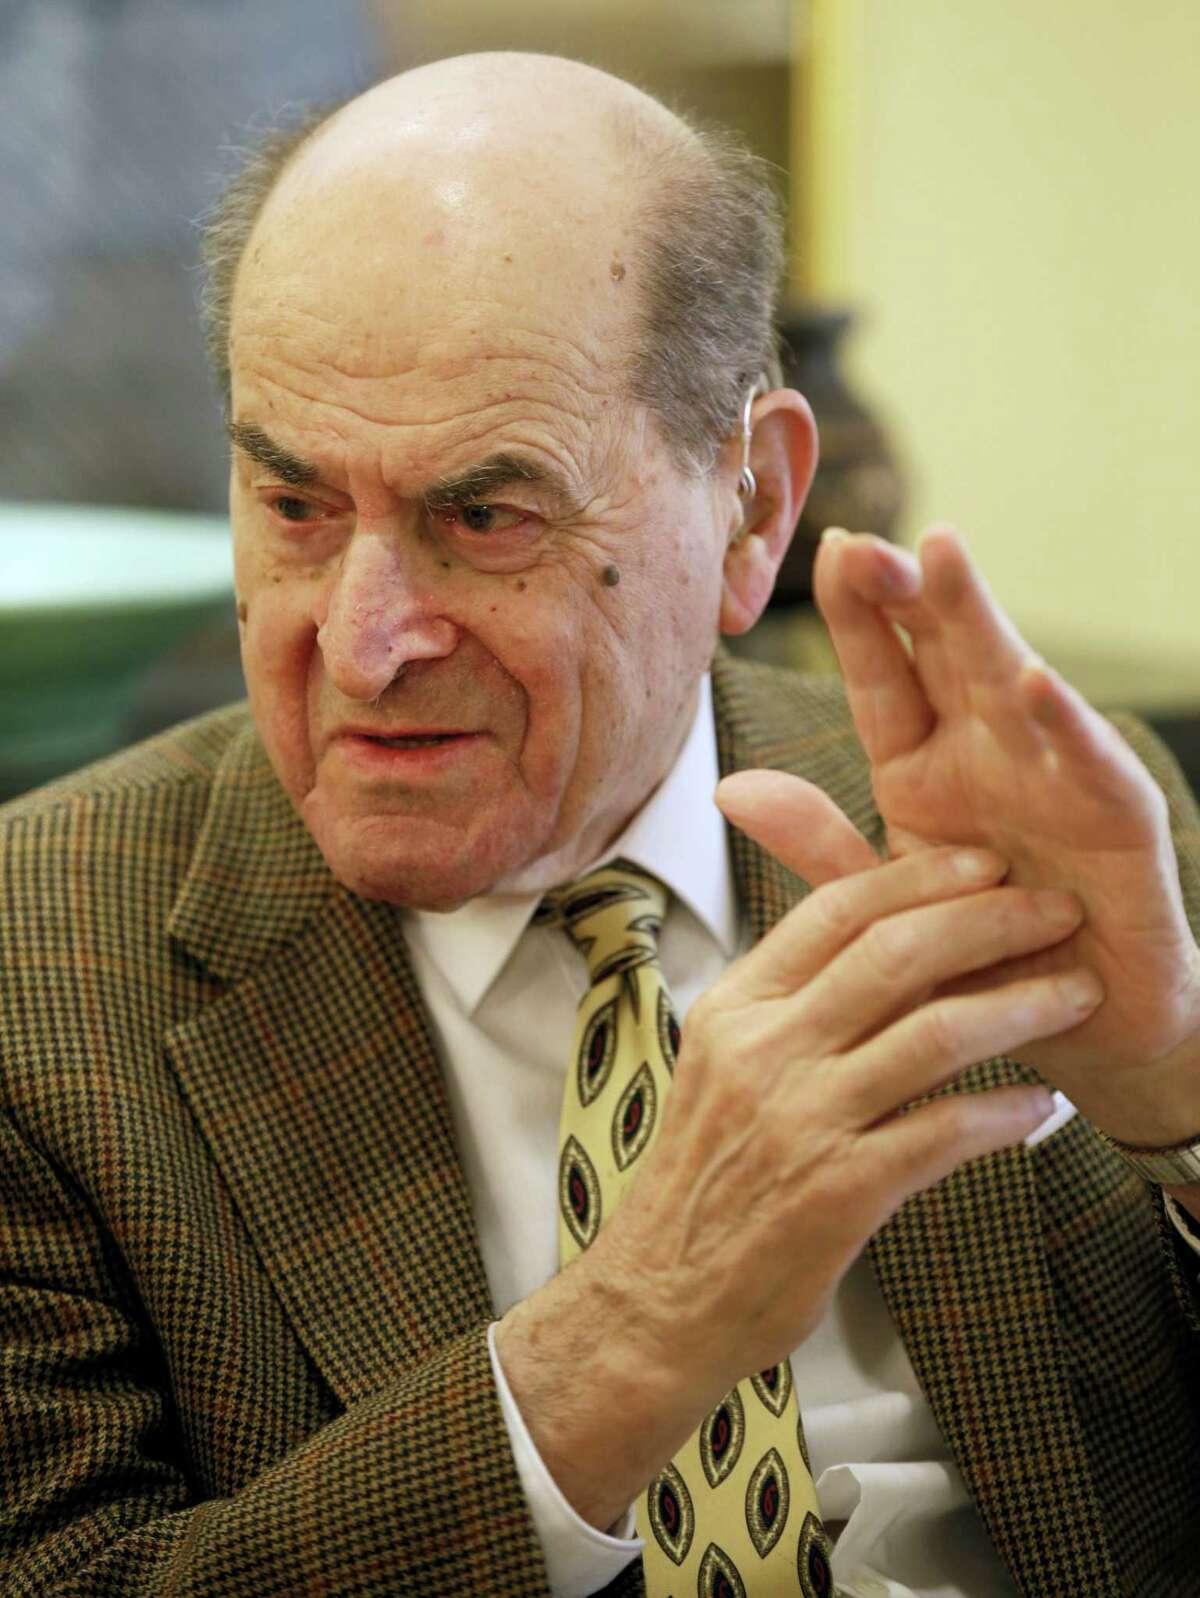 In this Feb. 5, 2014, file photo, Dr. Henry Heimlich describes the maneuver he developed to help clear obstructions from the windpipes of choking victims, while being interviewed at his home in Cincinnati. Heimlich recently used the emergency technique for the first time himself to save a woman choking on food at his senior living center. Heimlich said Thursday, May 26, 2016, that he has demonstrated the well-known maneuver many times through the years but had never before used it on a person who was choking.